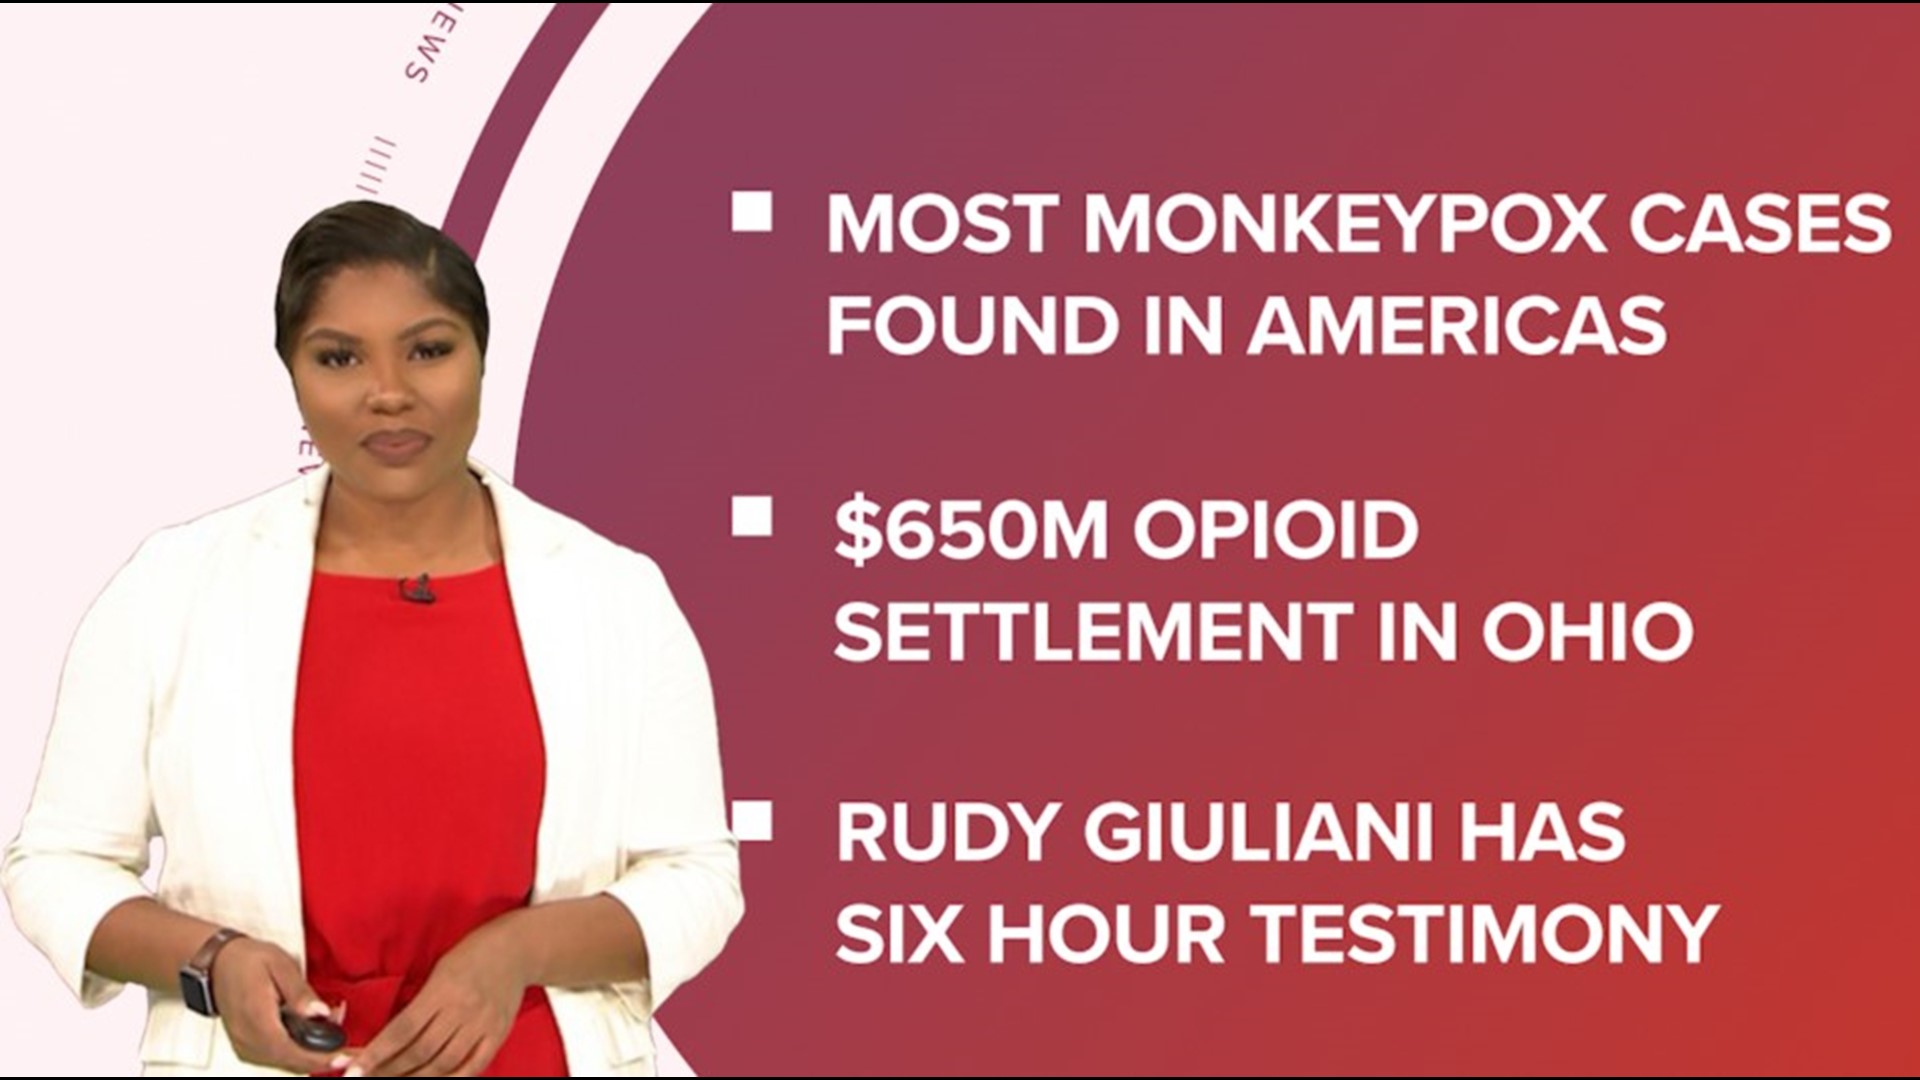 A look at what is happening across the US from Rudy Giuliani giving testimony for six hours to CDC reorganizing and Airbnb using 'anti-party' technology.